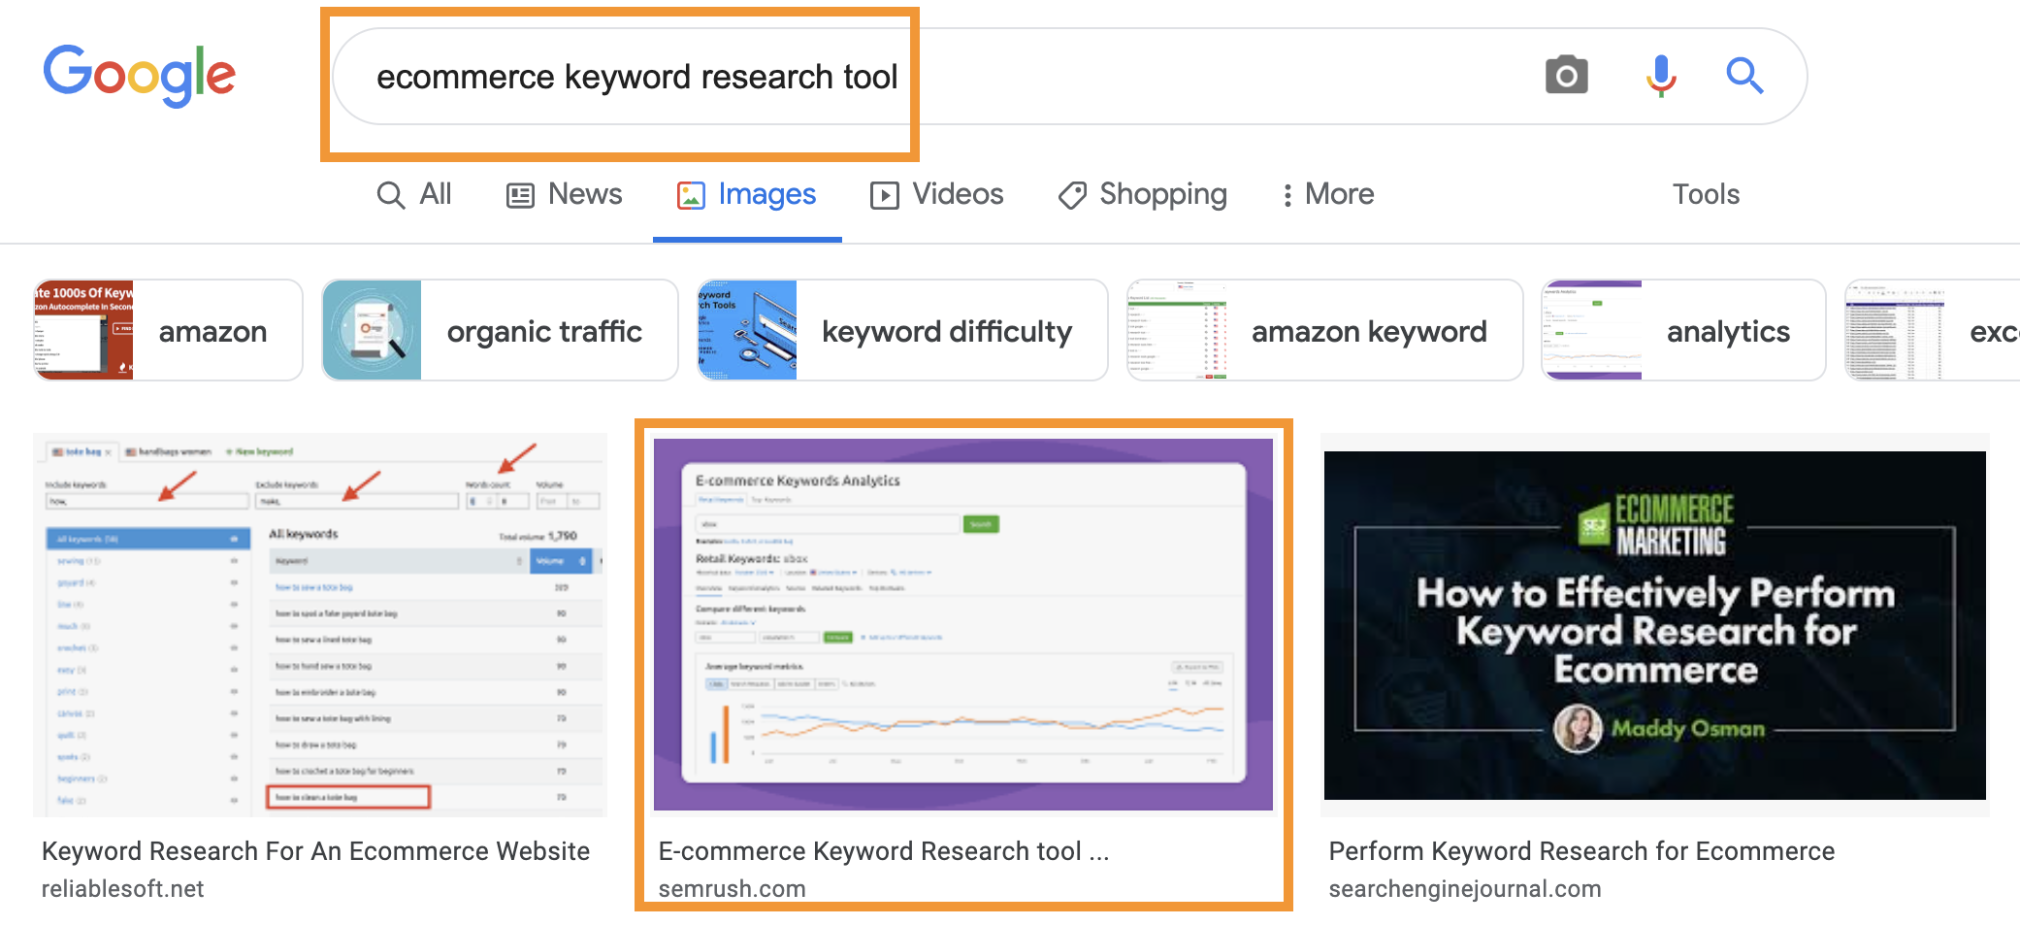 ecommerce keyword research tool image search results